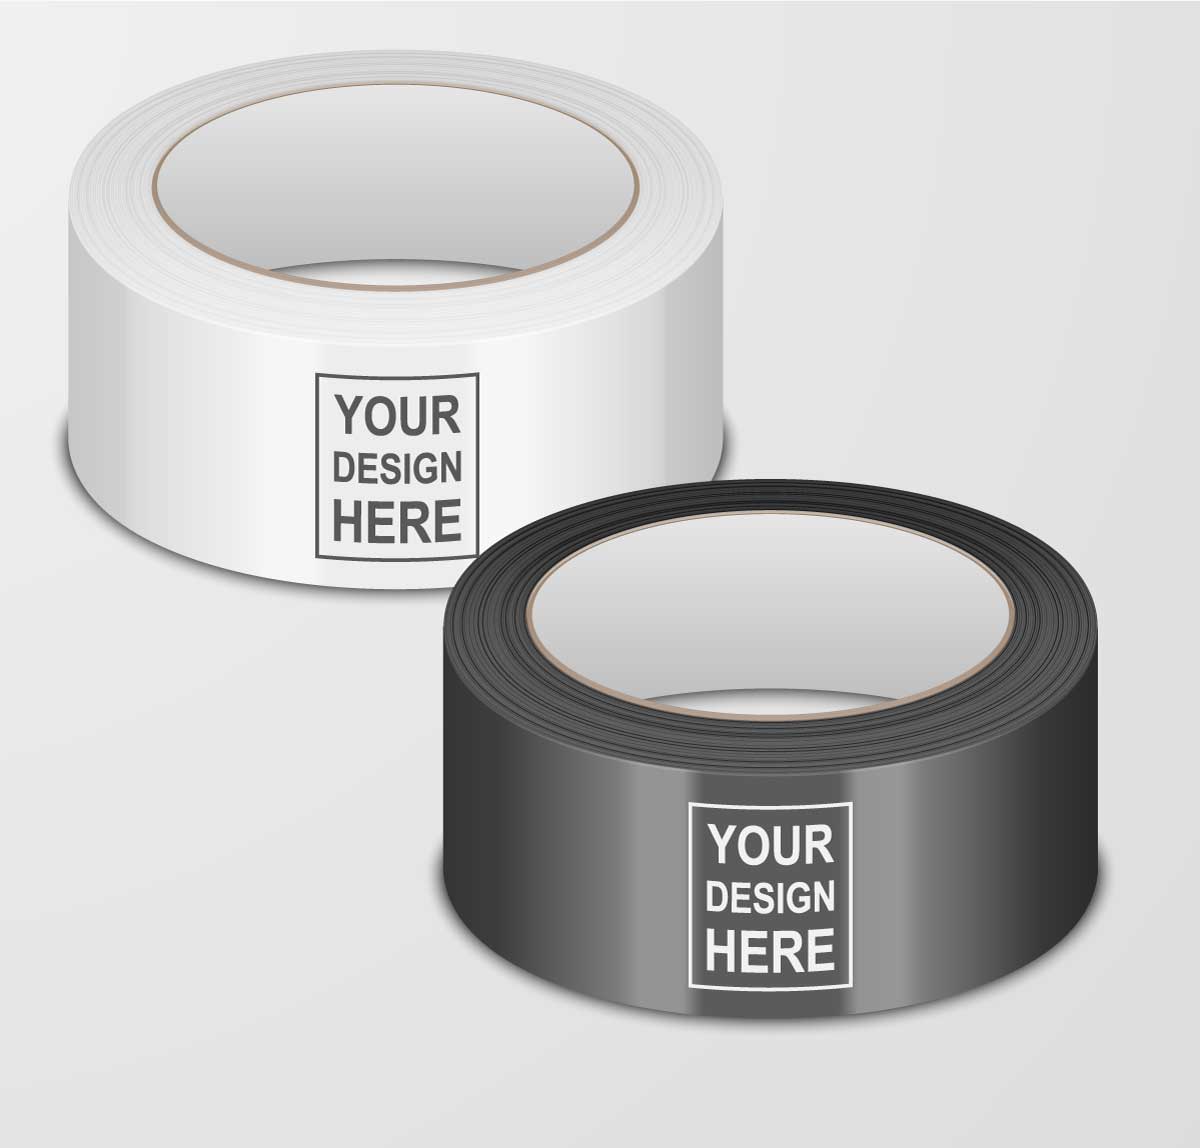 Custom Printed Packing Tape / OPP Tapes with your logo | 2S Packaging